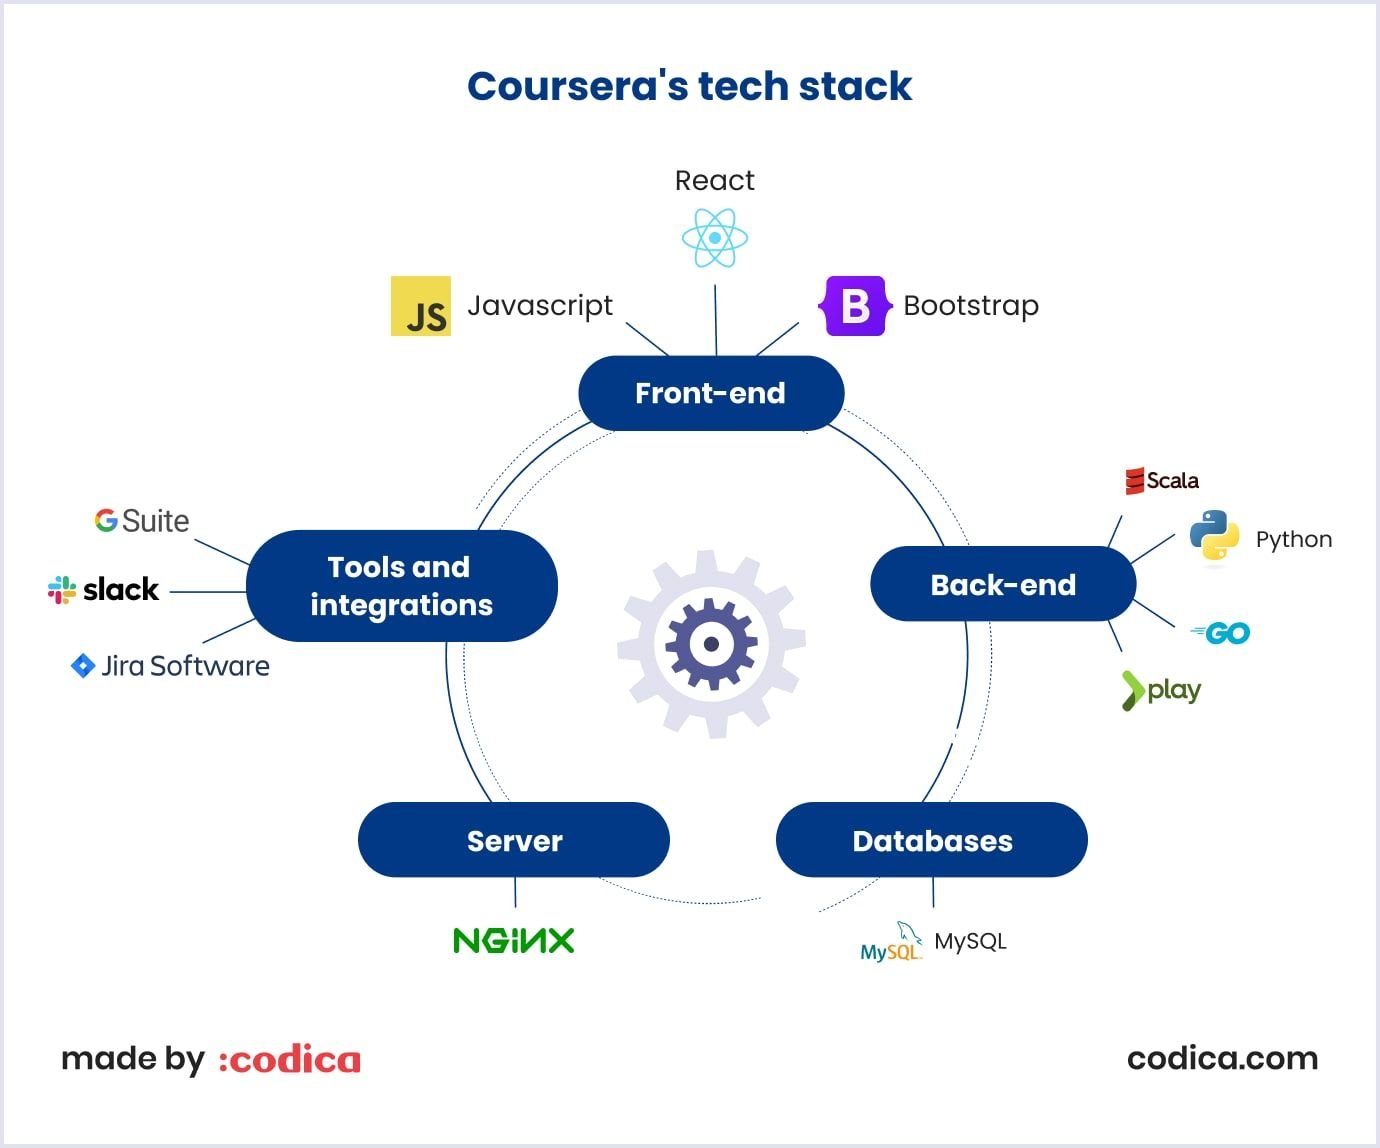 Coursera's tech stack